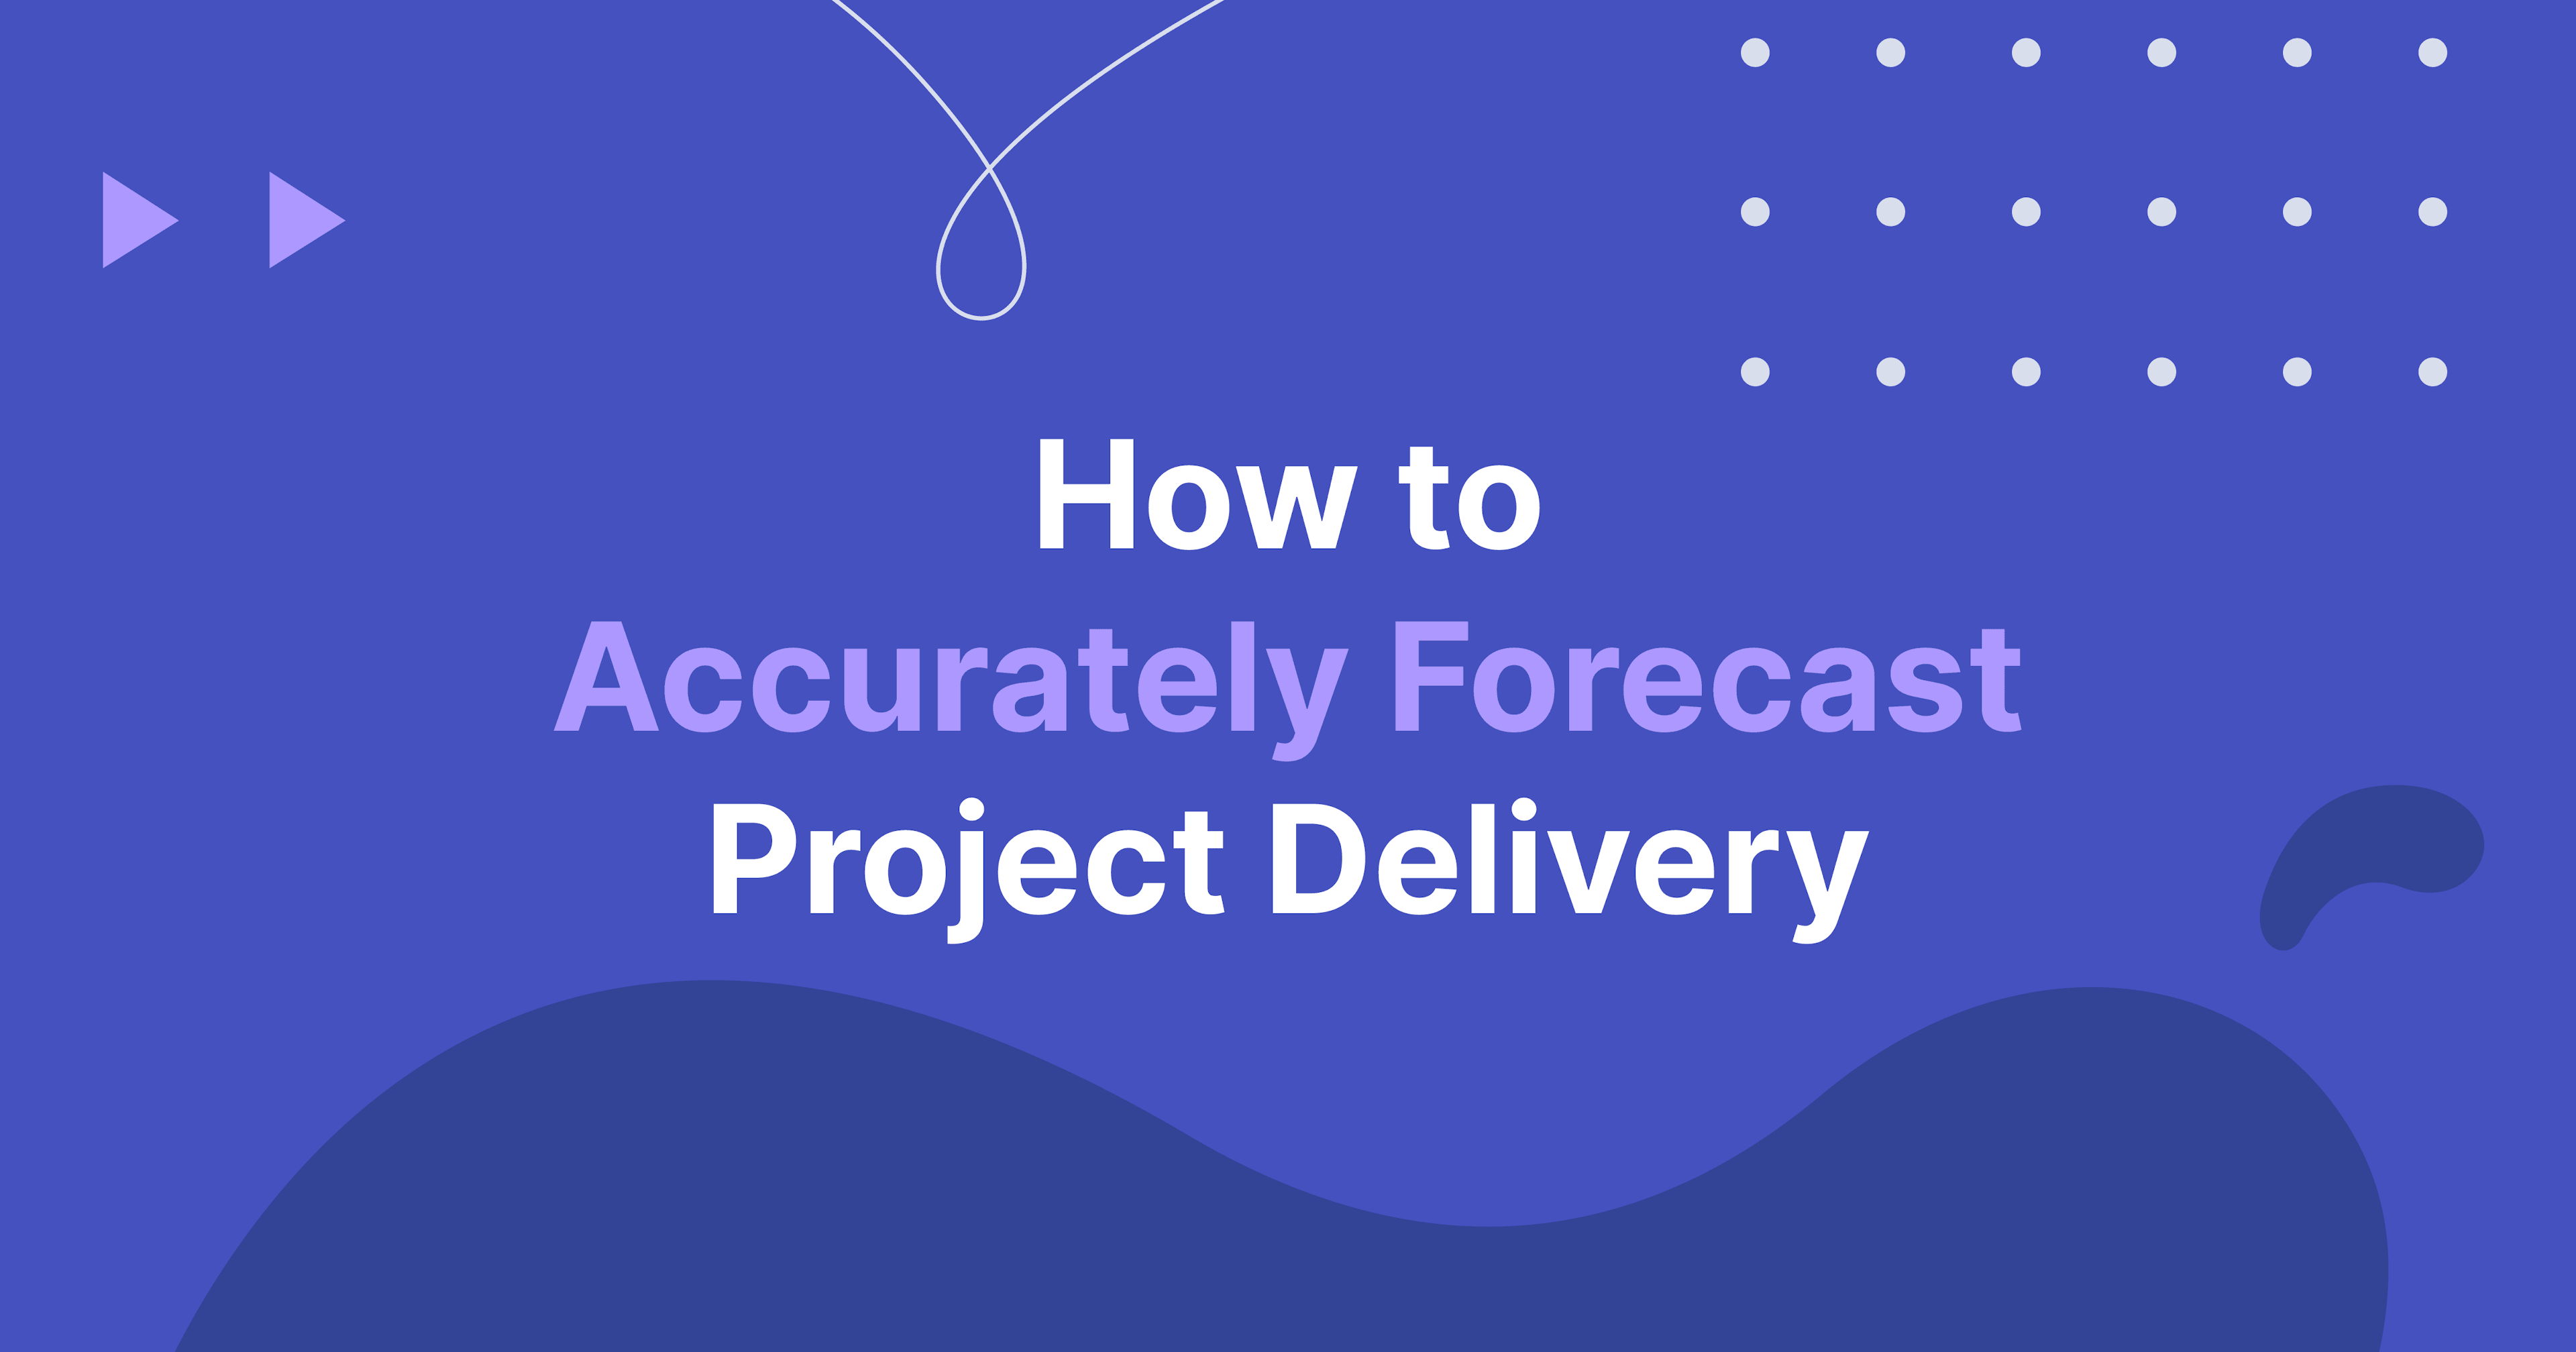 How to Accurately Forecast Project Delivery